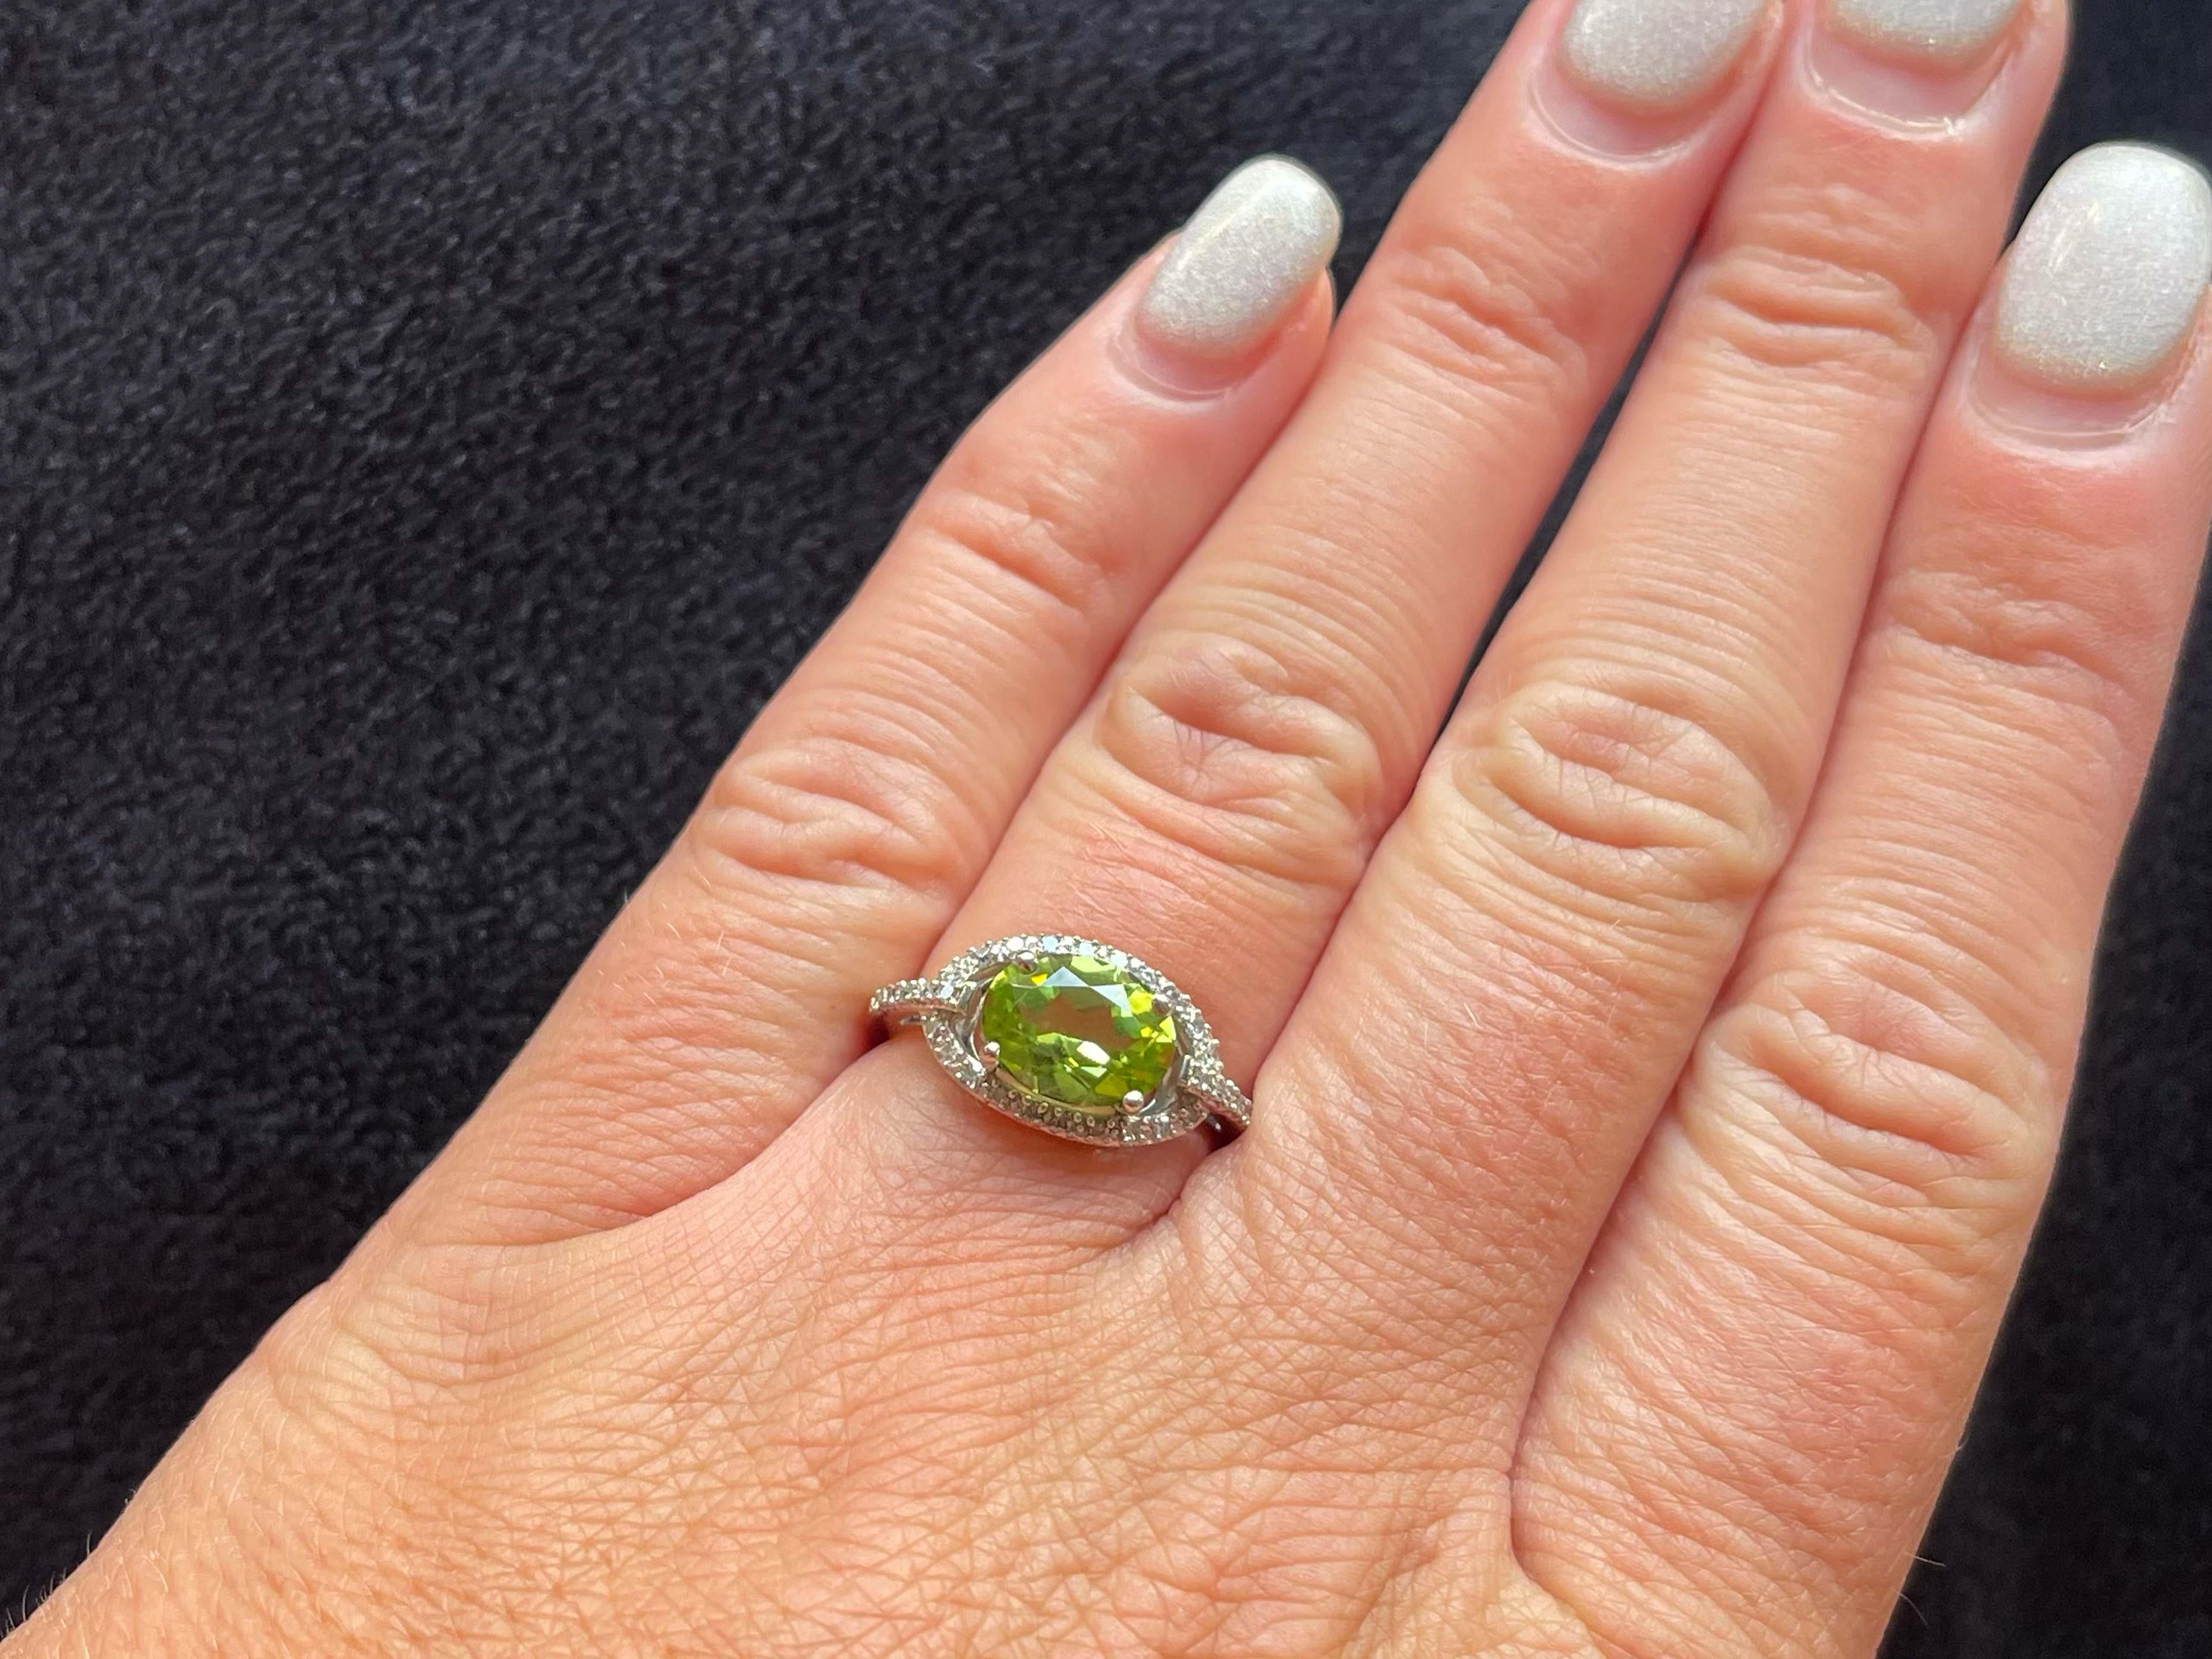 Item Specifications:

Metal: 14K White Gold

Style: Statement Ring

Ring Size: 5.5 (resizing available for a fee)

Total Weight: 2.9 Grams

Gemstone Specifications:

Gemstones: 1 green peridot

Peridot Measurements: 9.14 x 7.06 x 4.30
​
​Diamond